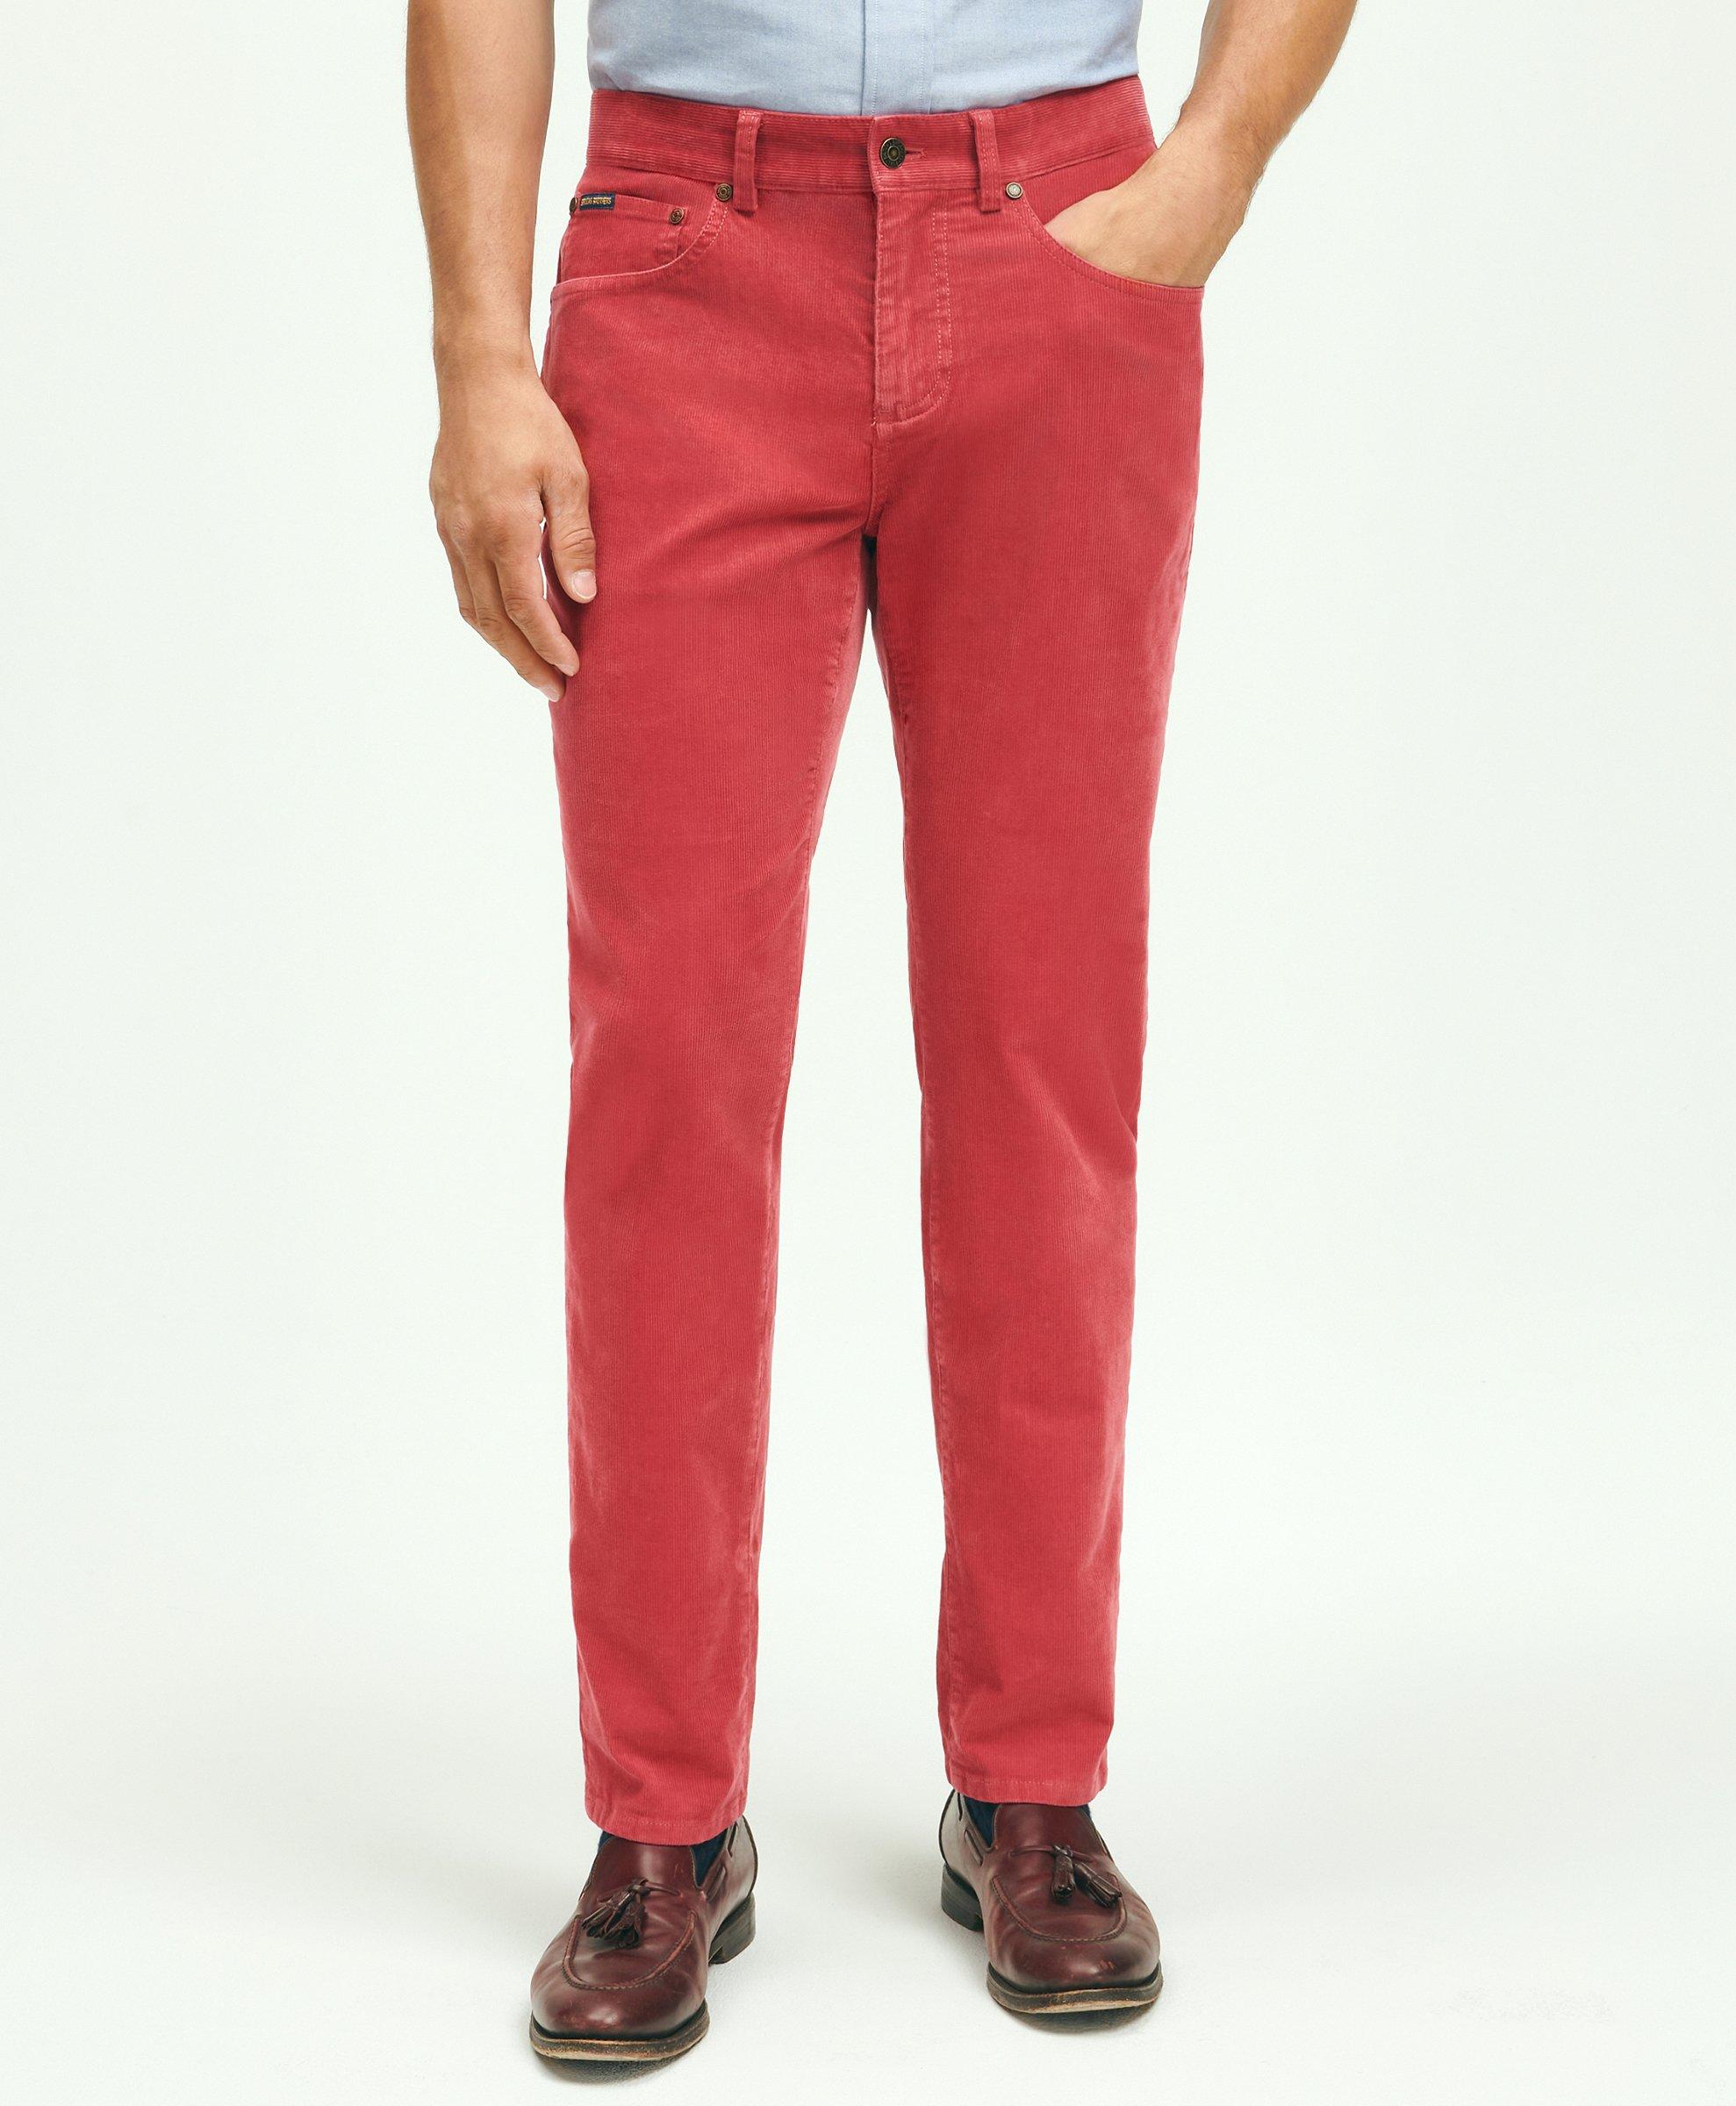 https://cdn.media.amplience.net/i/brooksbrothers/MR00597_BRIGHT-RED?$large$&fmt=auto